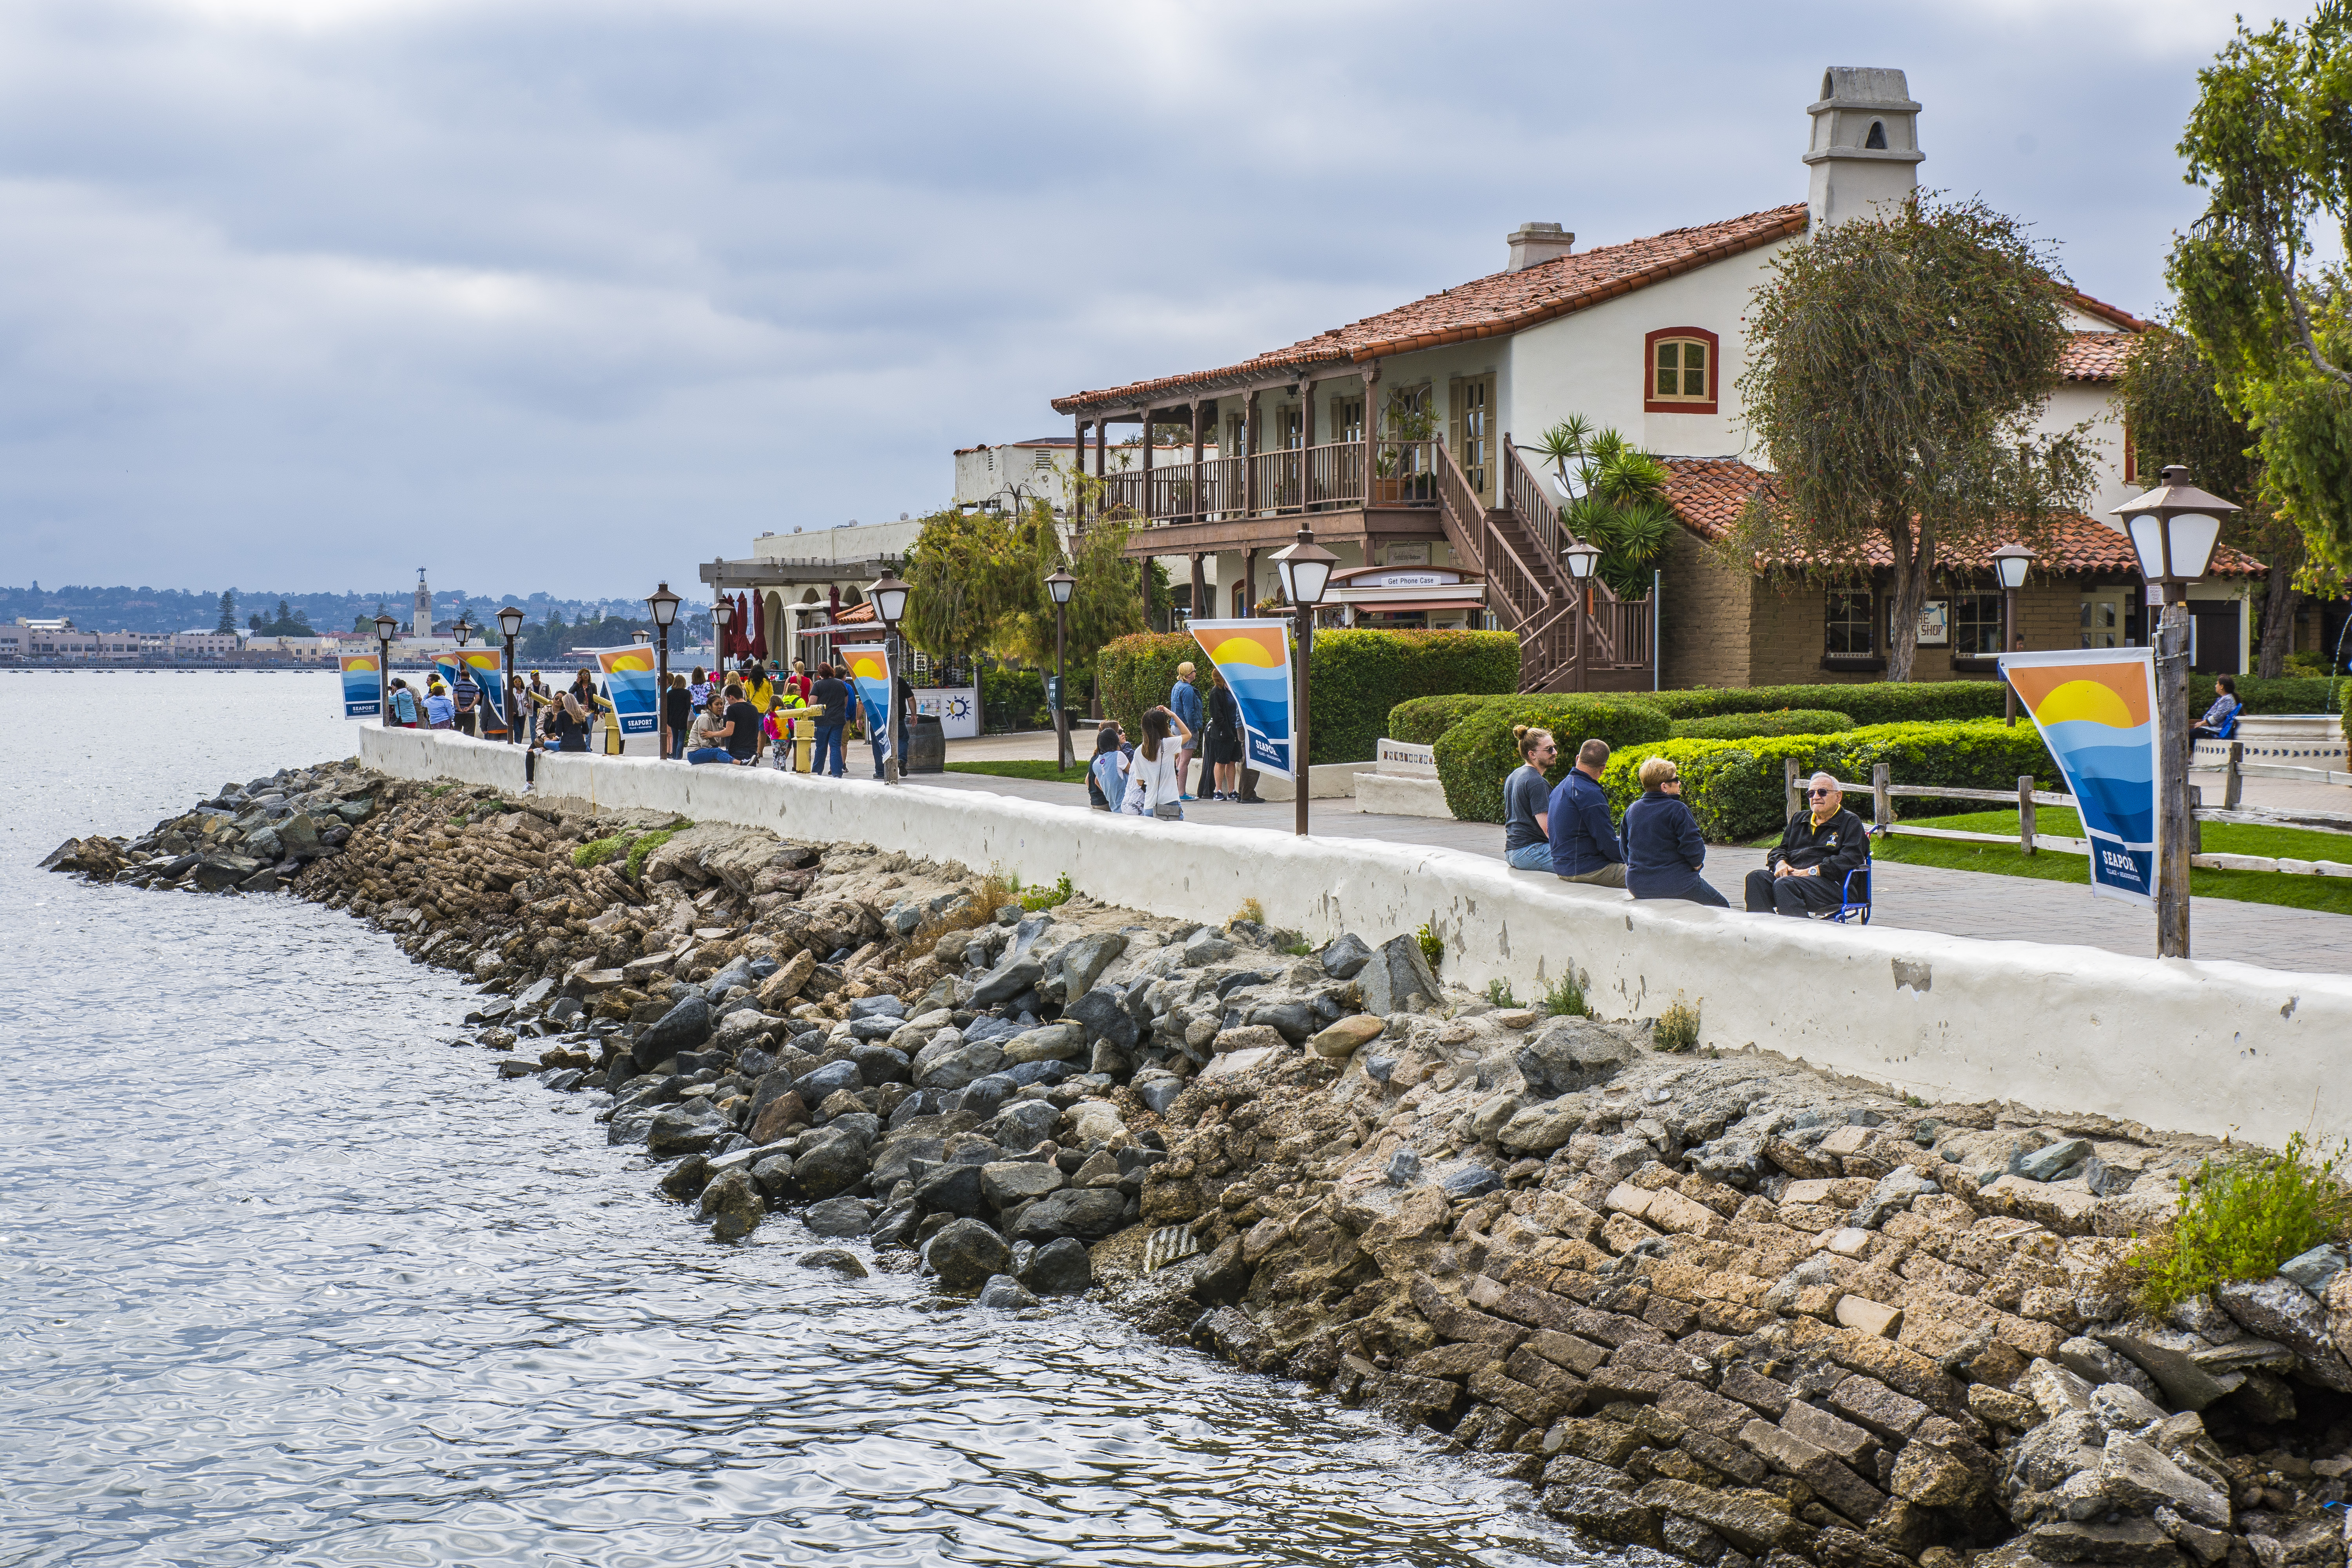 Seaport Village is Going Modern - Loma Beat